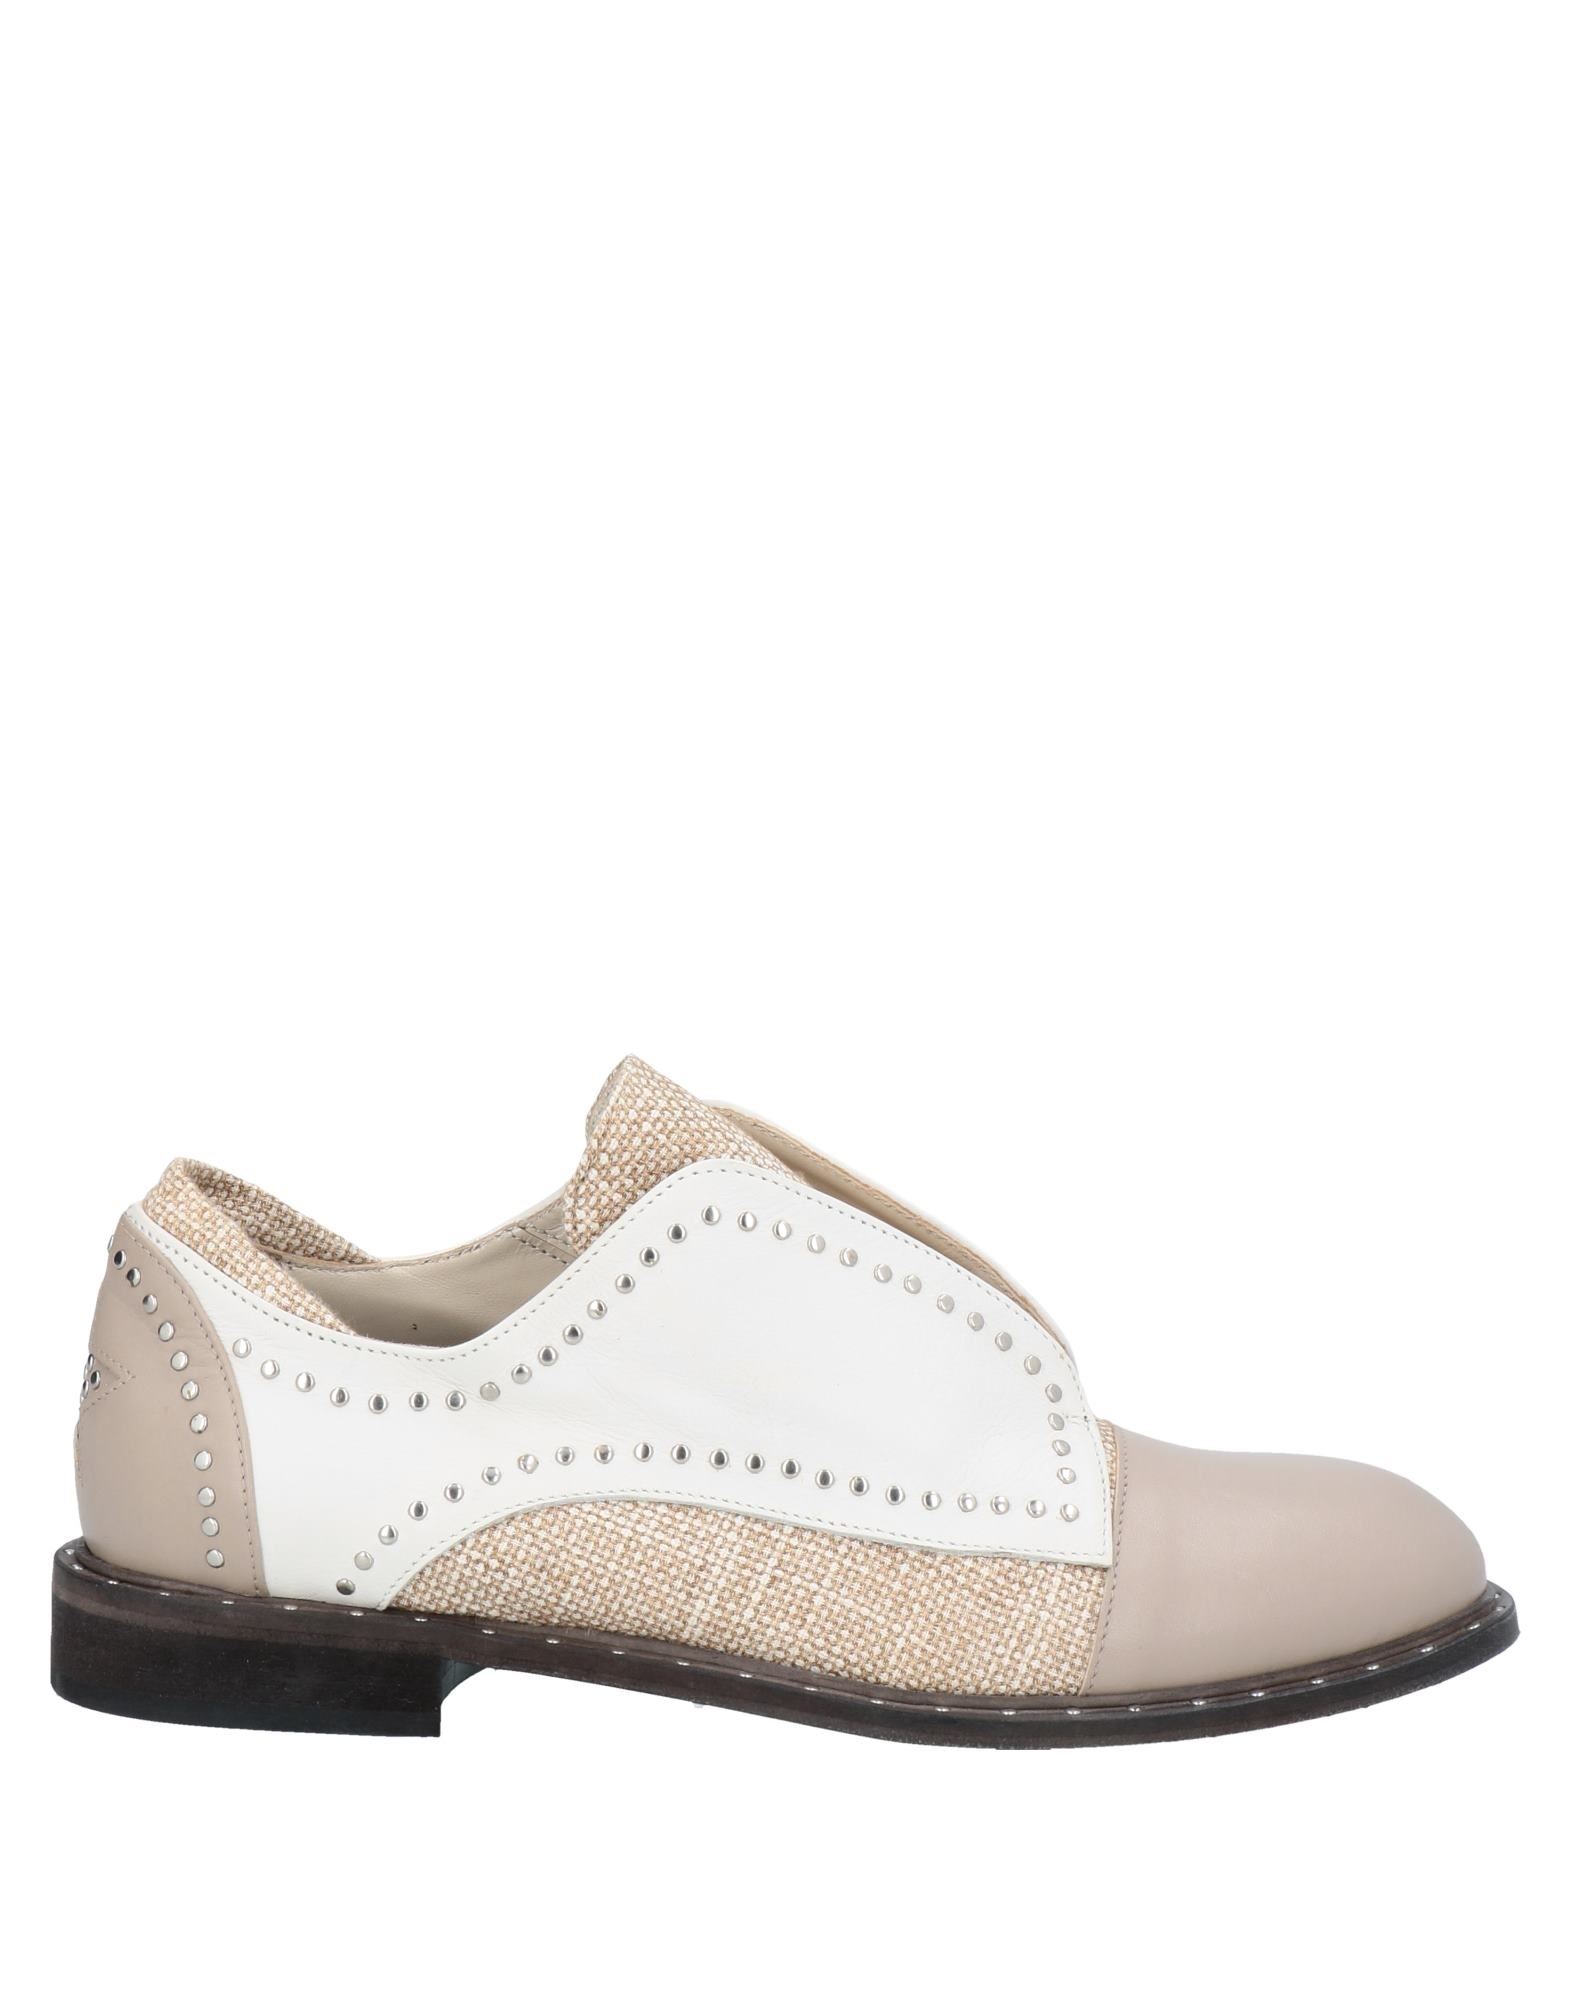 Lorena Antoniazzi Loafers In Grey